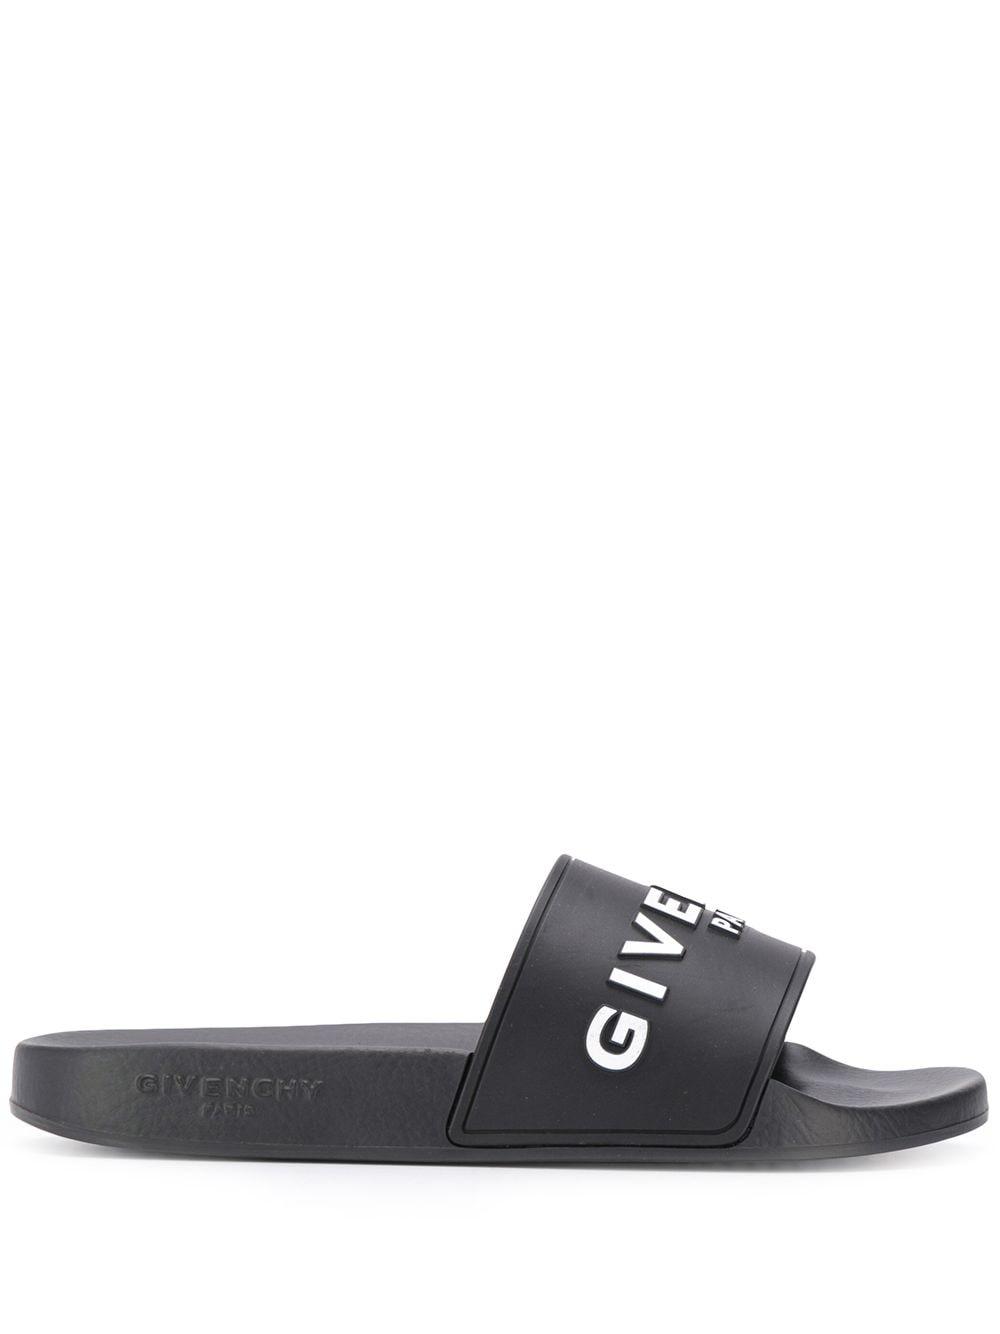 Givenchy Synthetic Sandals Black - Save 